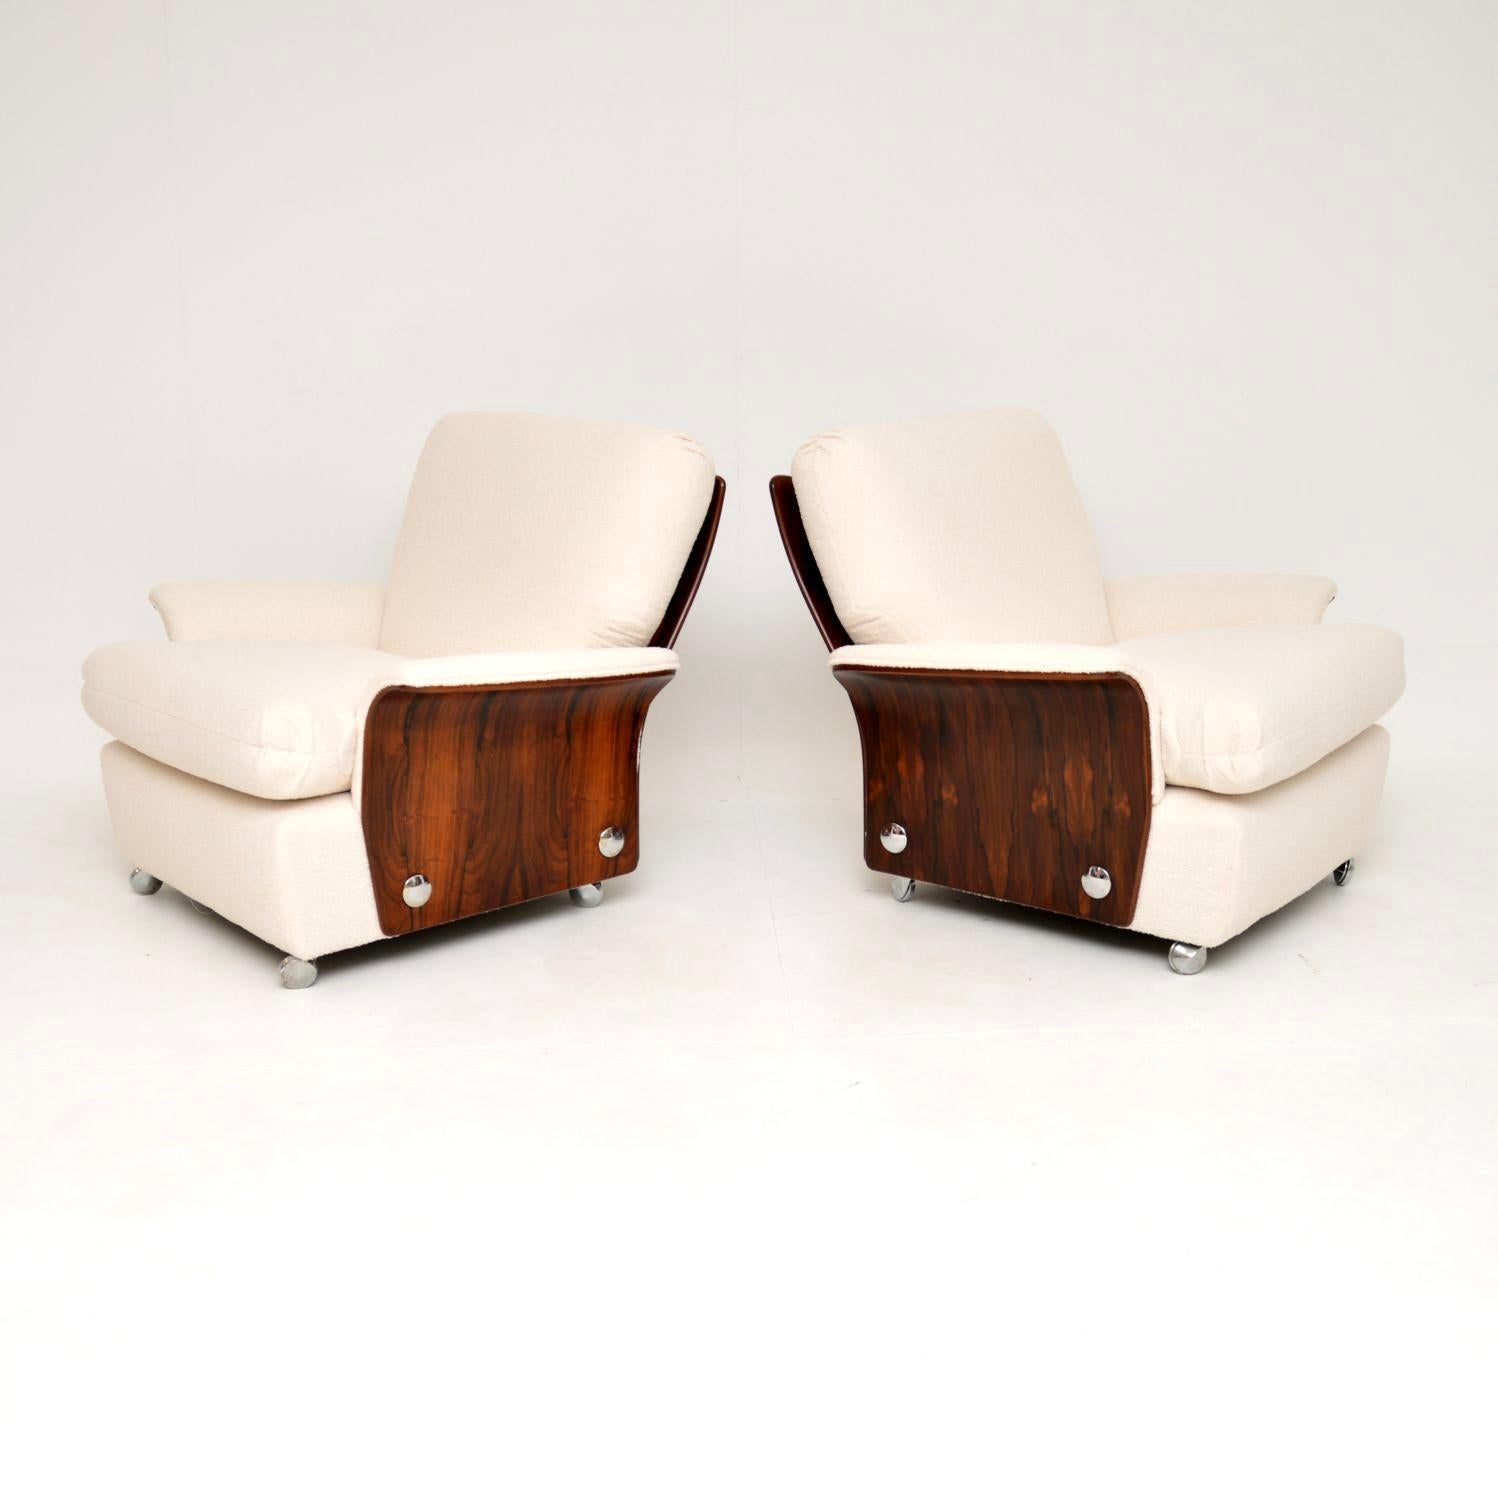 A stylish and very rare pair of rosewood armchairs by G Plan. They were designed as part of the ‘Tulip Group’ by KM Wilkins. They were made in England and date from the 1960’s.

The design is stunning, with beautiful rosewood panels on the sides and